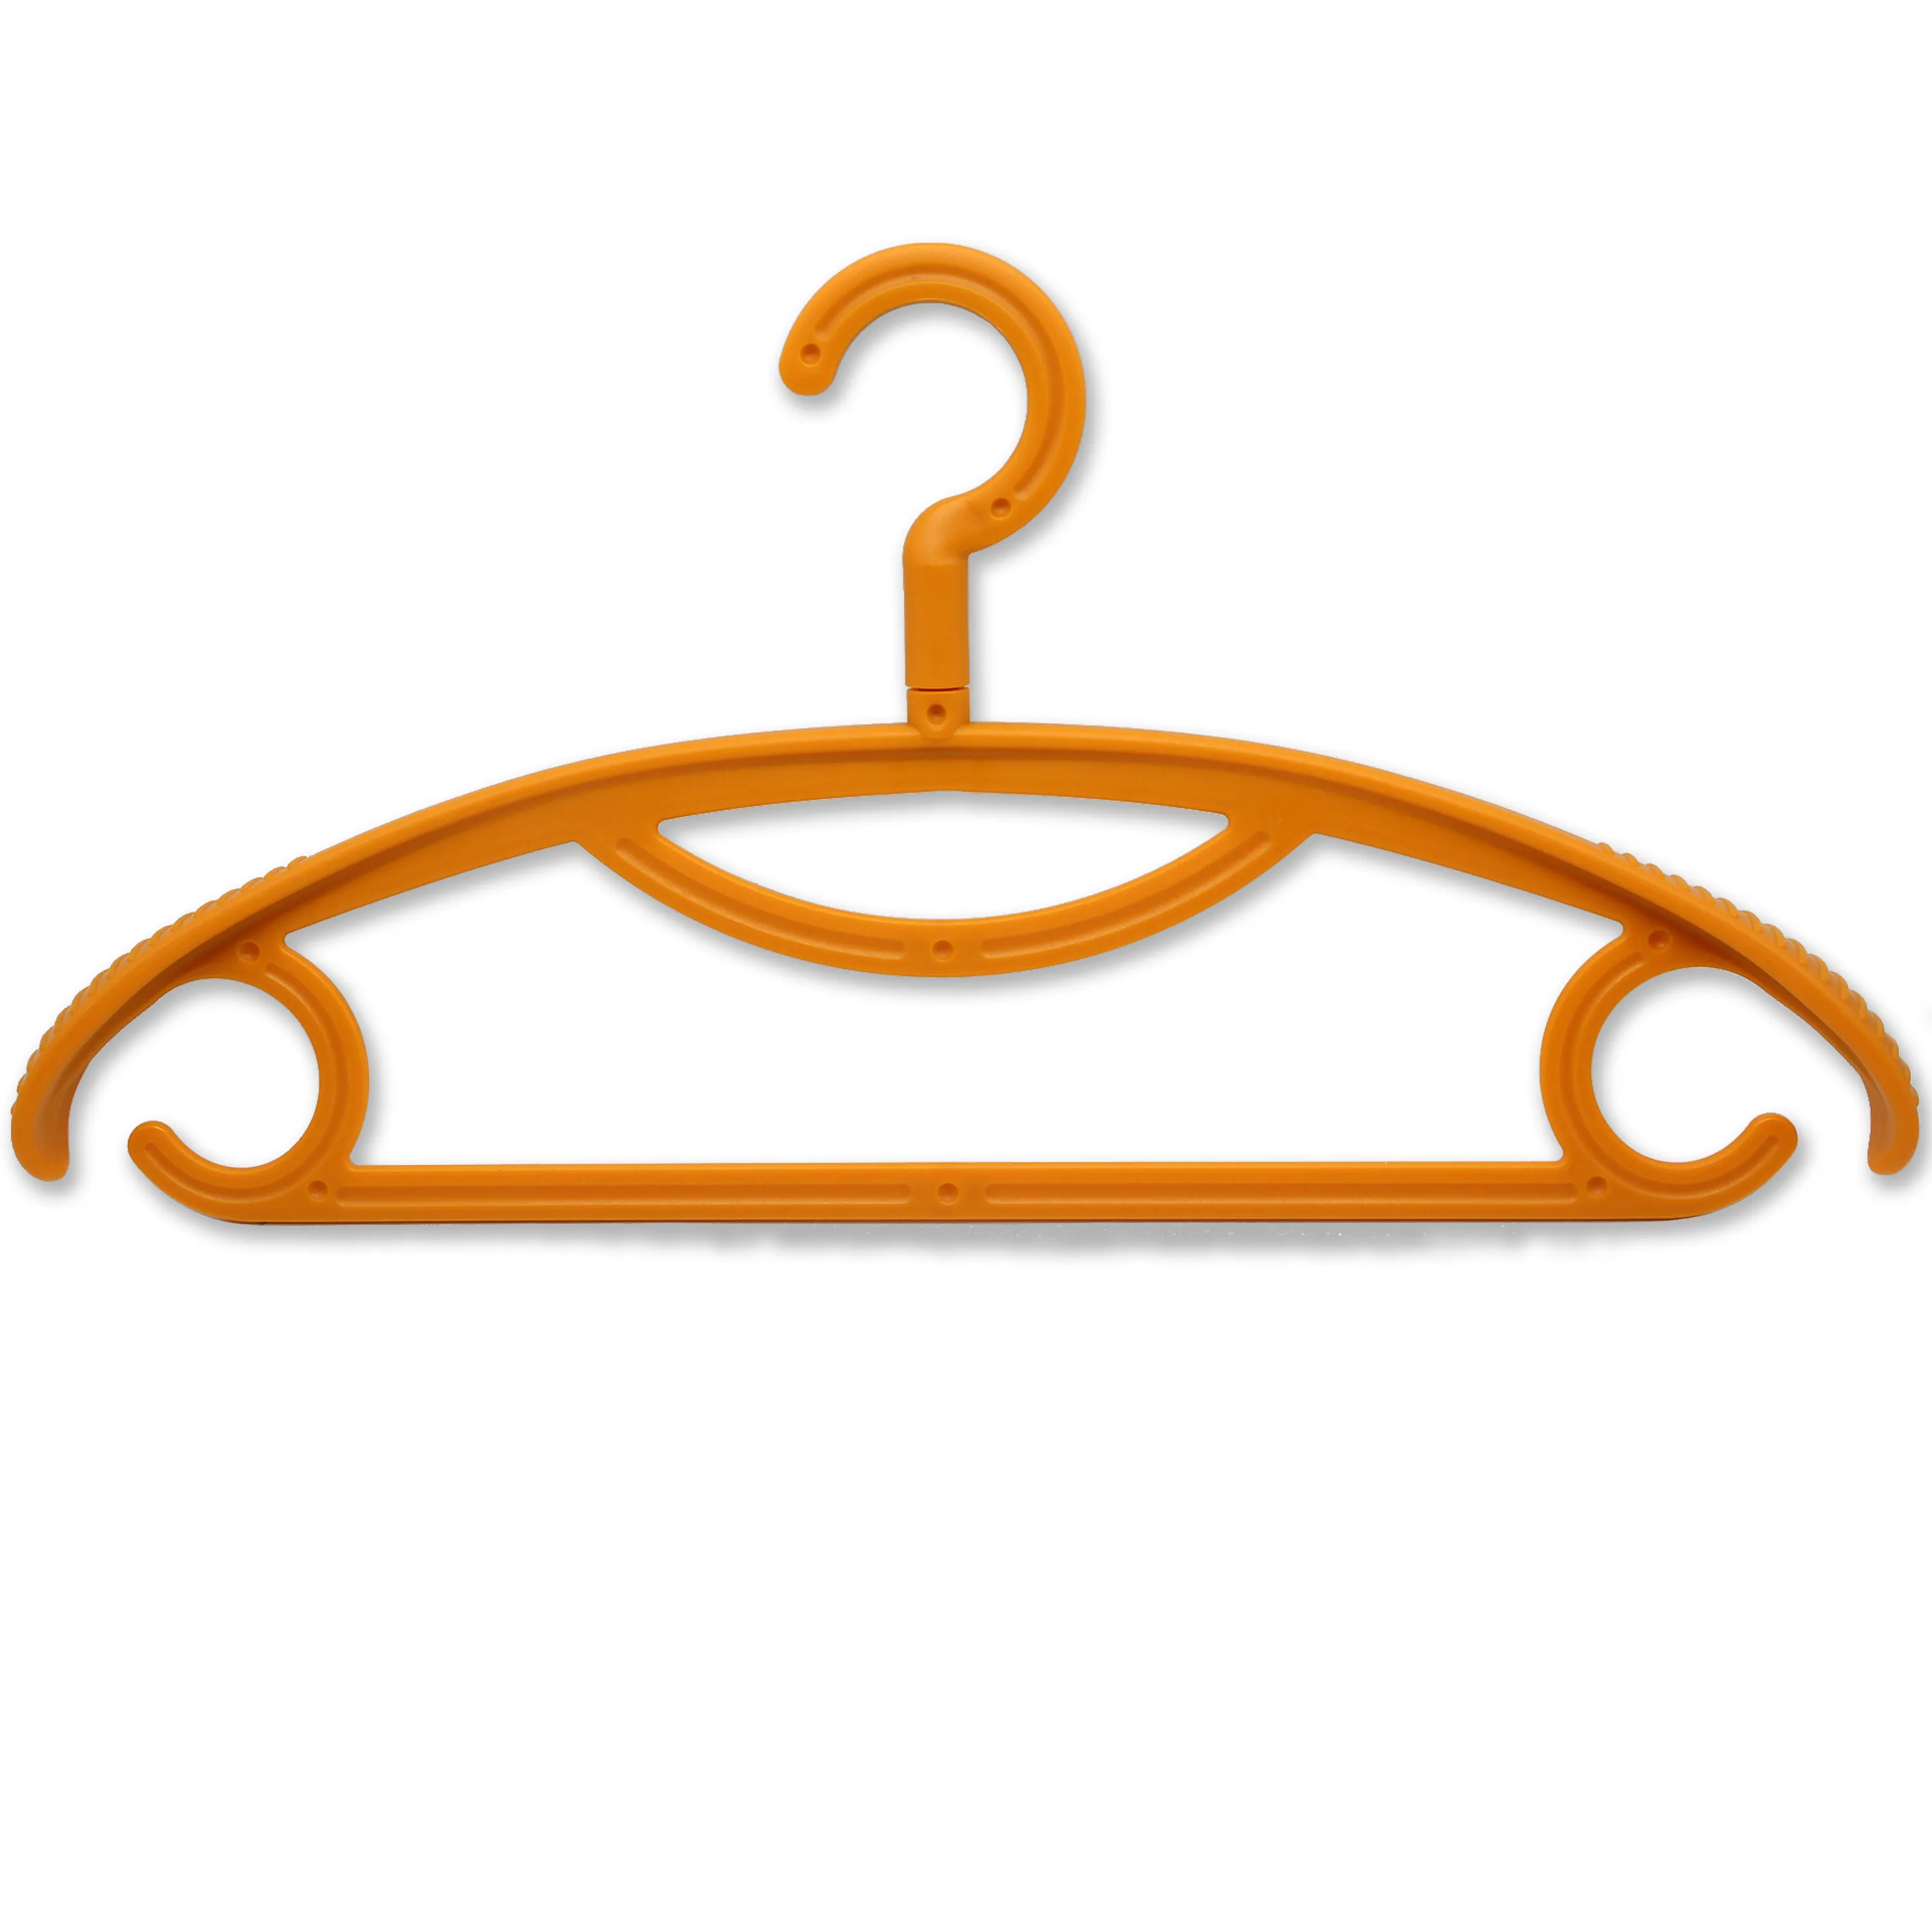 Luxury Wholesale Hangers for clothing store and wardrobe